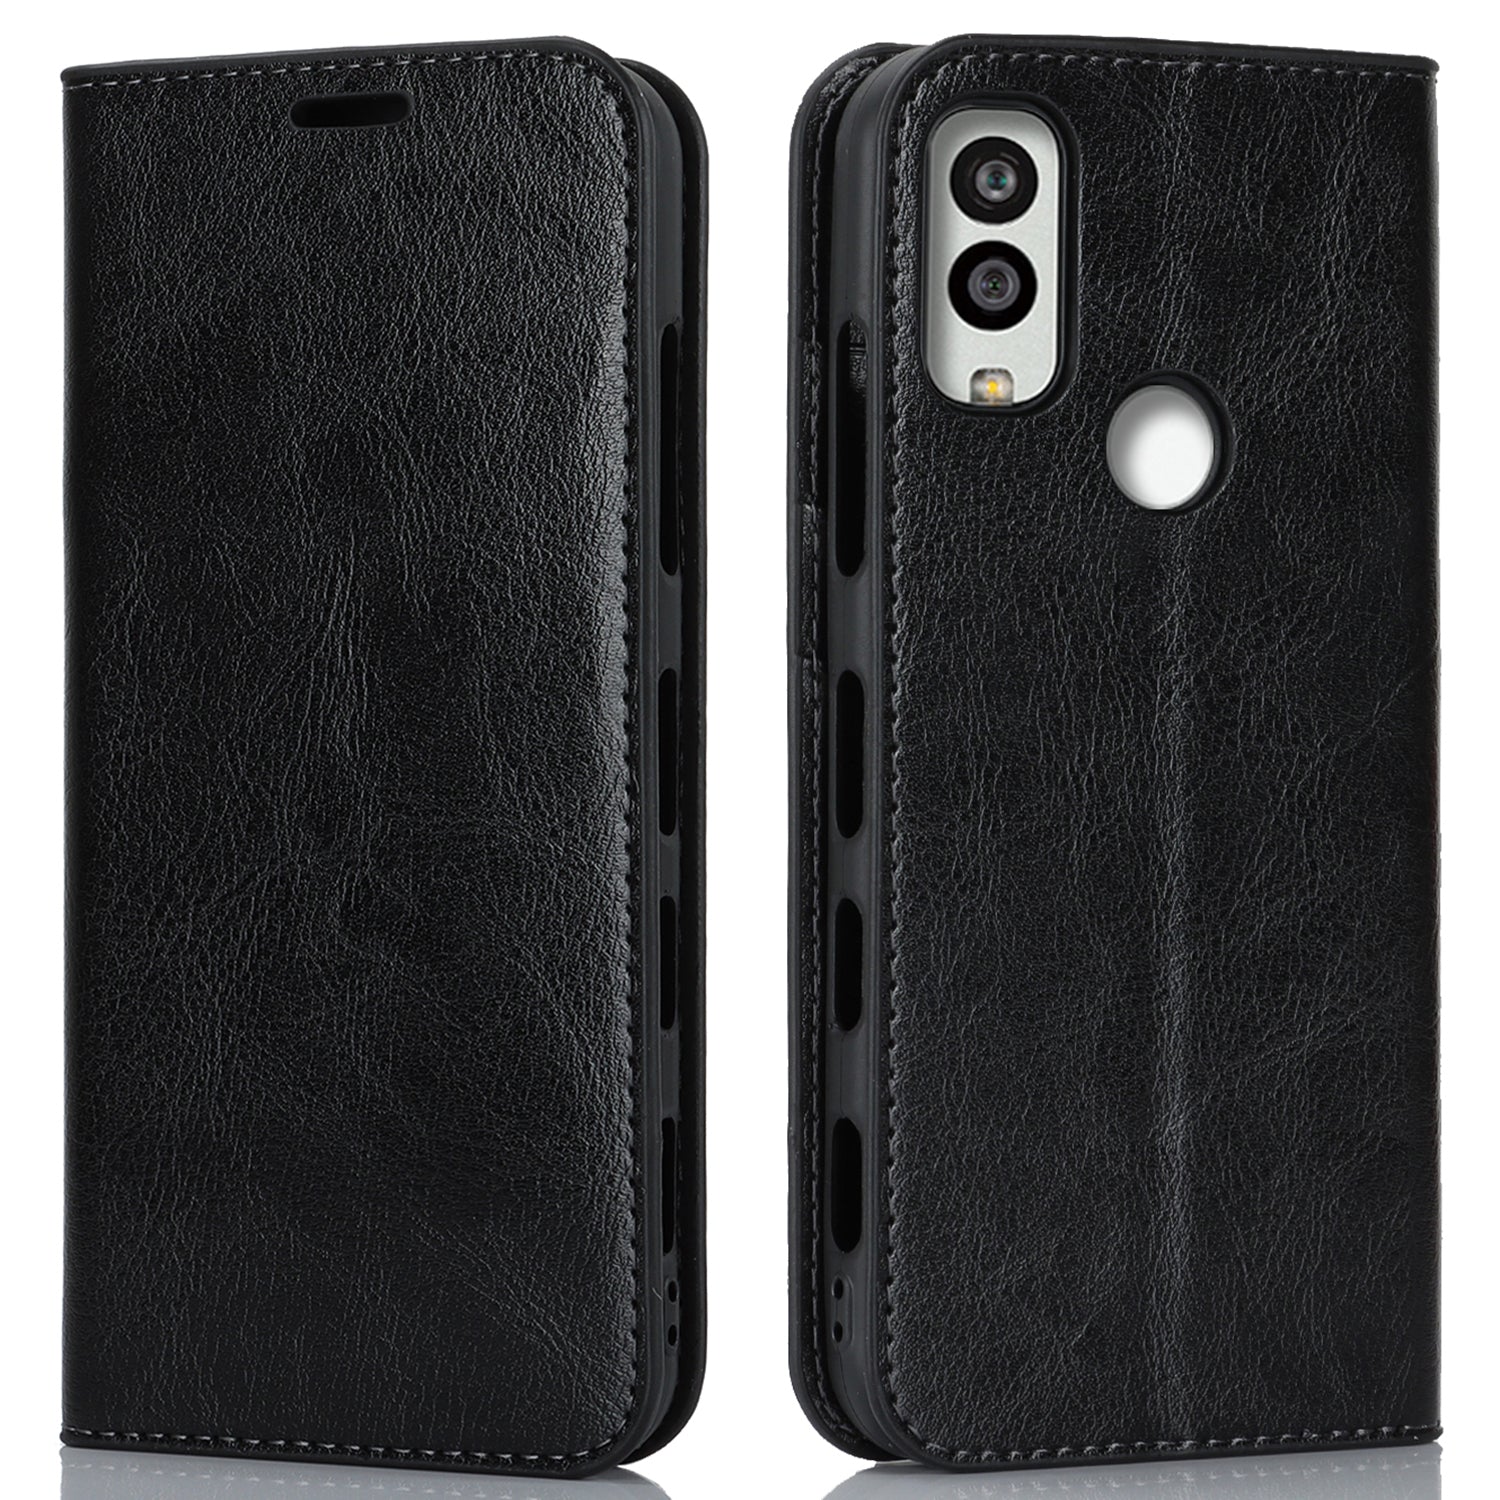 Uniqkart for Kyocera Android One S10 / One S9 Fall Proof Phone Case Crazy Horse Texture Genuine Cow Leather Stand Wallet Cover - Black